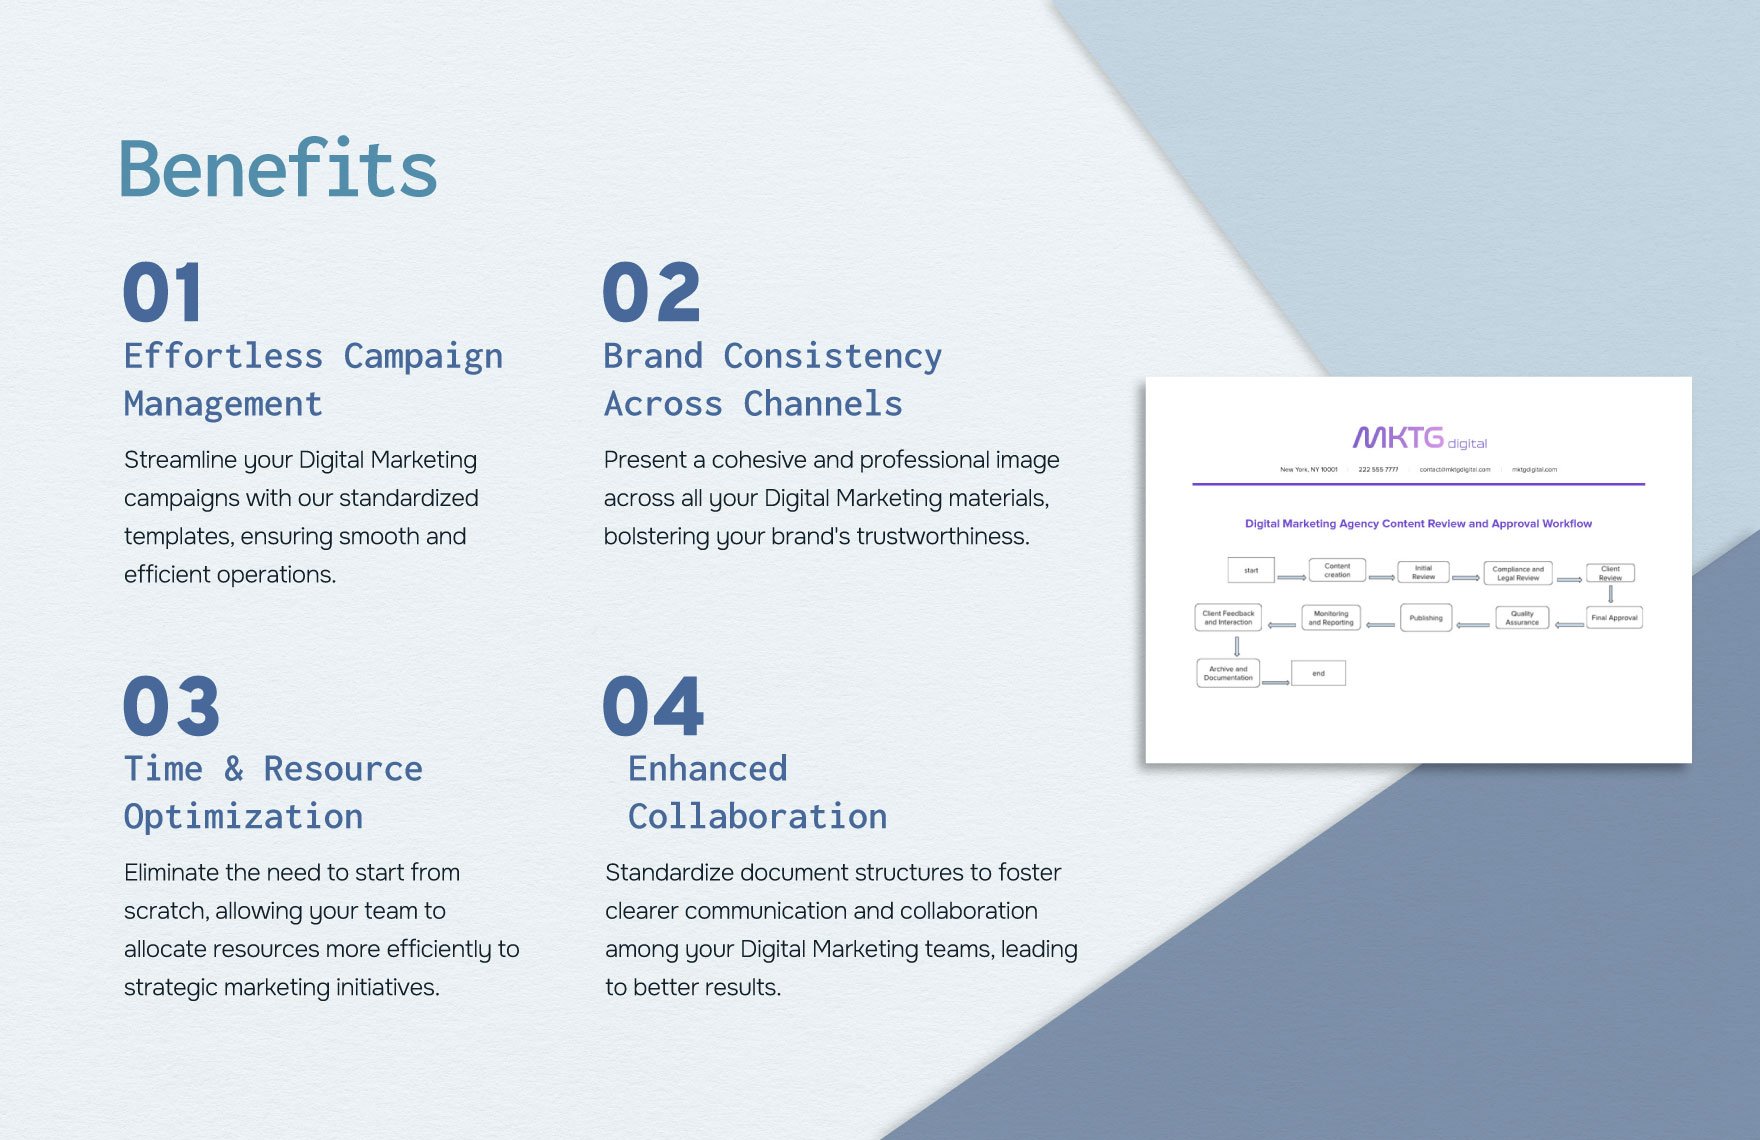 Digital Marketing Agency Content Review and Approval Workflow Template